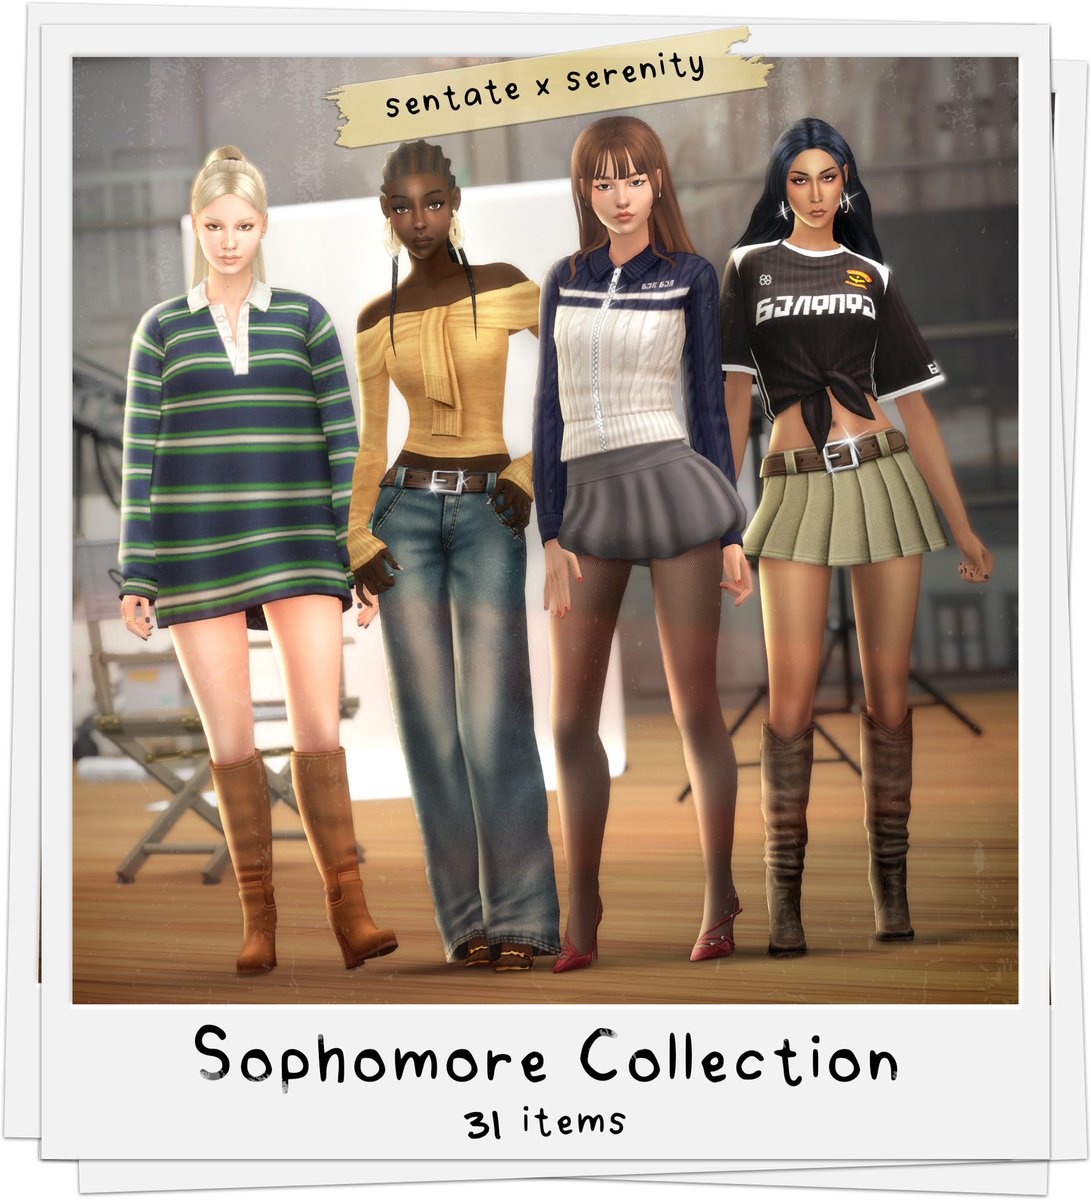 The Sophomore Collection is out now for early access! @serenitycc2 and I had so much fun collaborating last year we just had to make a sequel. This year’s set takes a casual, preppy approach to wardrobe essentials with a cute sporty twist. Public: 28th of April.